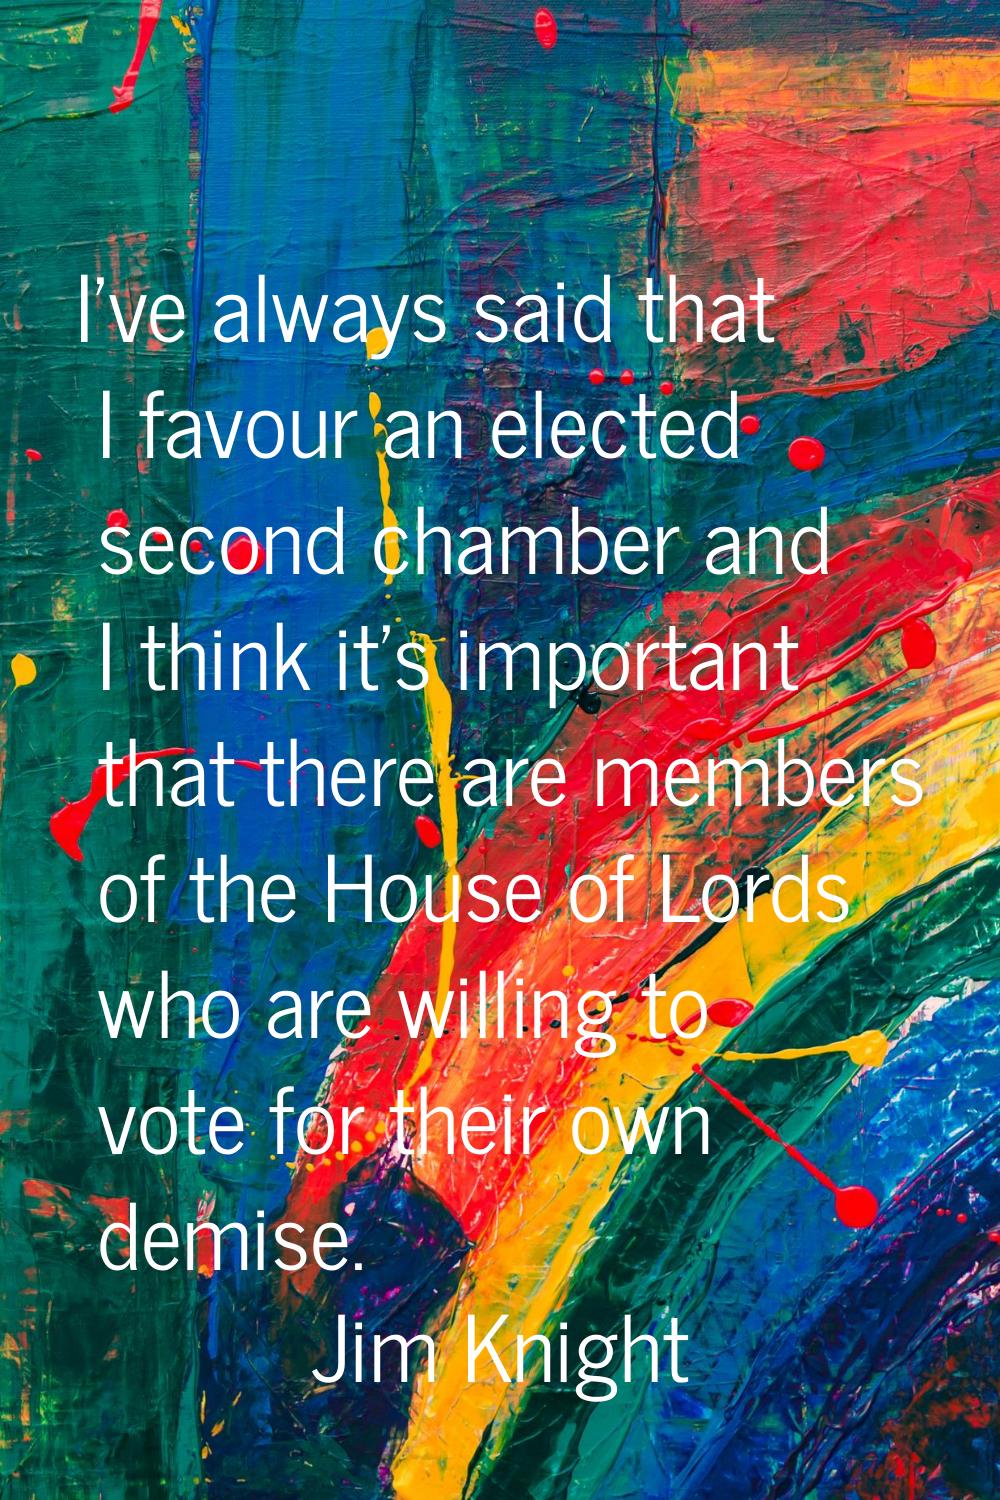 I've always said that I favour an elected second chamber and I think it's important that there are 